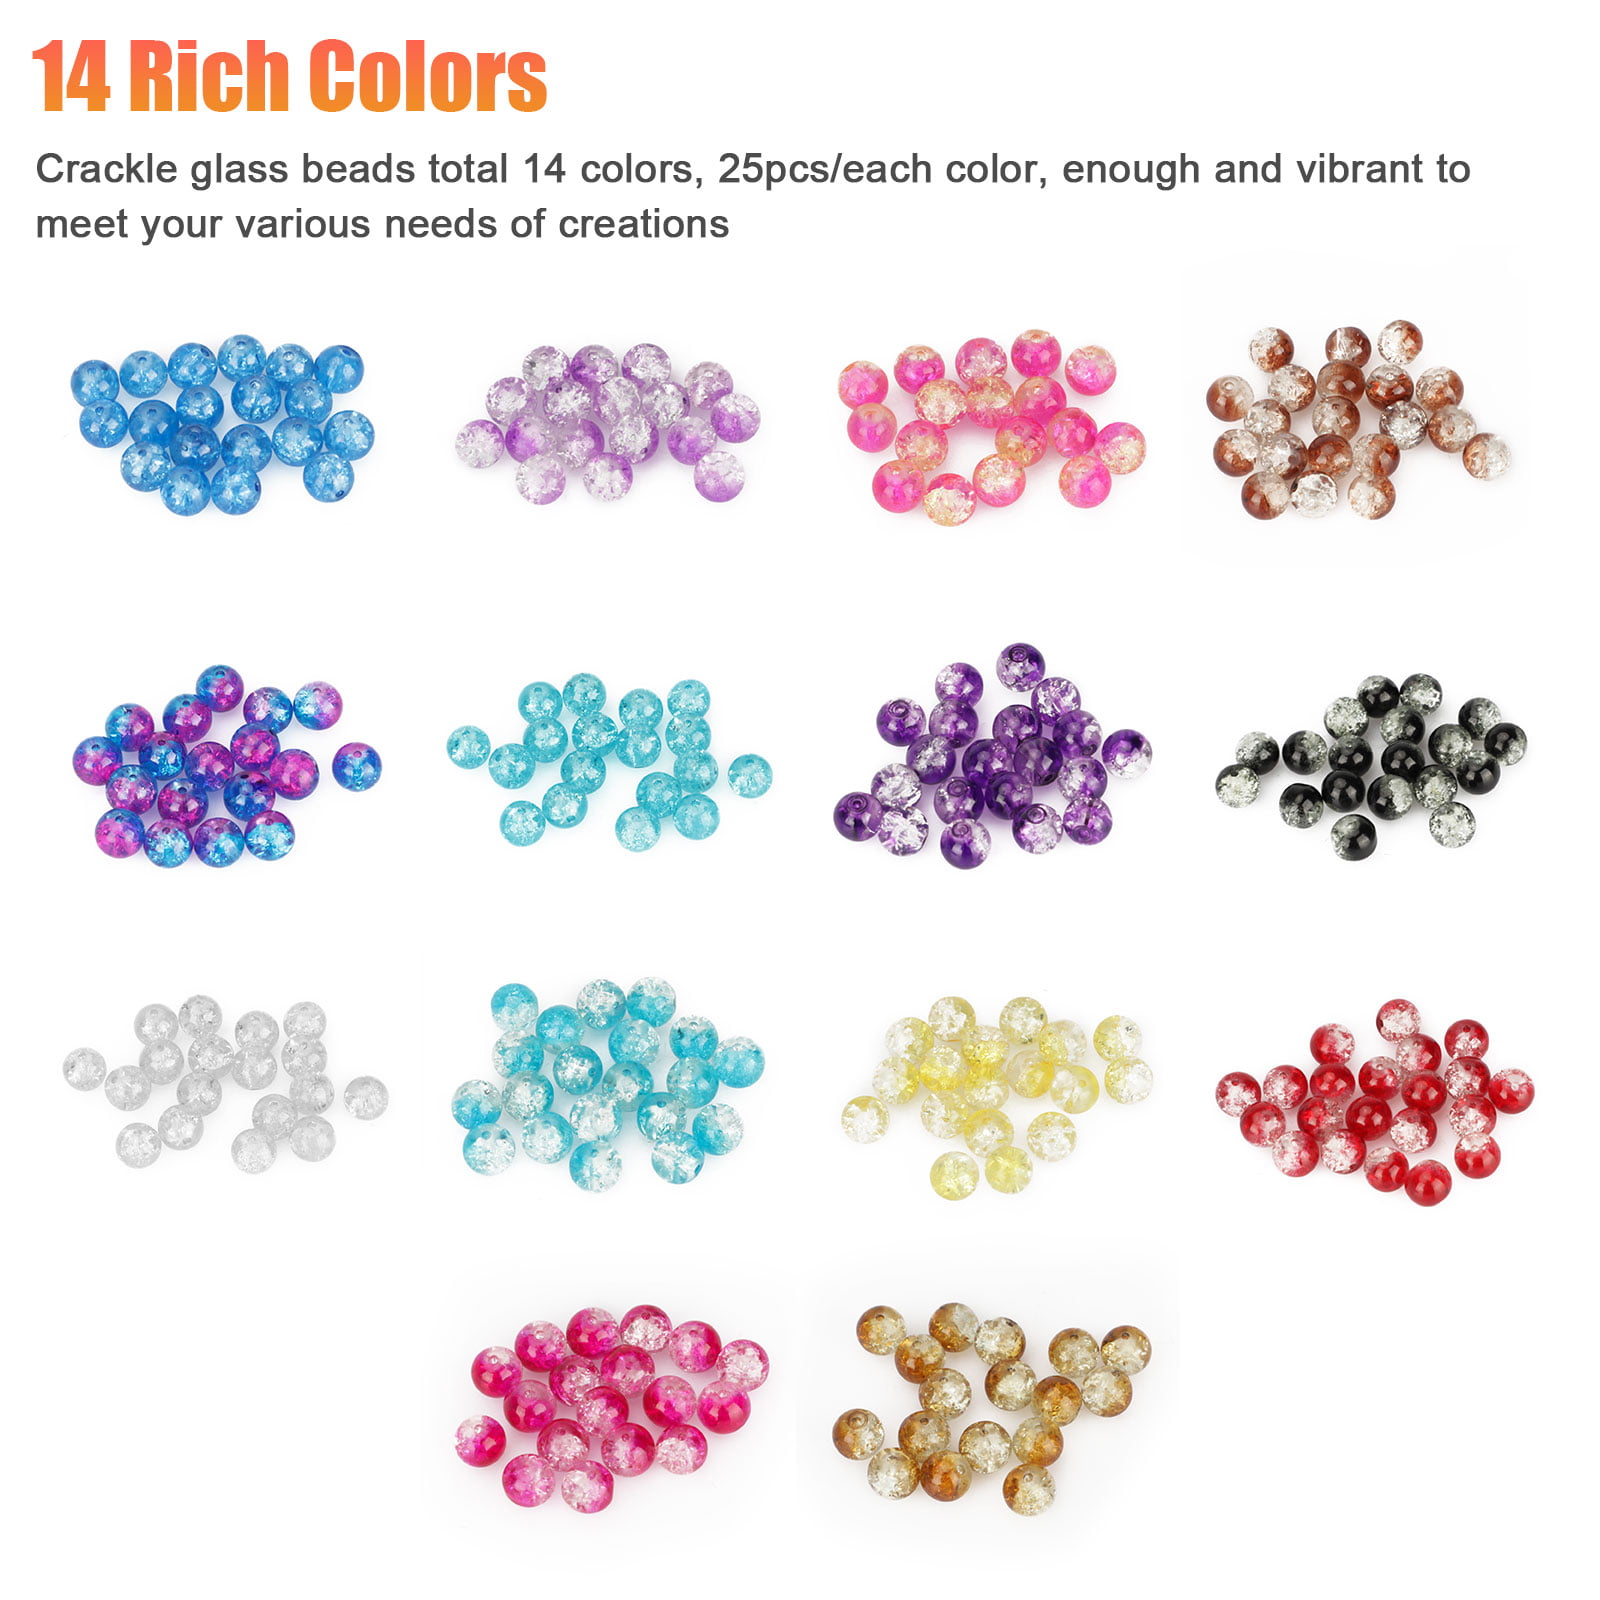 Suhome 1920pcs 8 Color Crackle Lampwork Glass Beads 4mm 6mm 8mm Handcrafted  Round Spacer Loose Beads for Jewelry Making